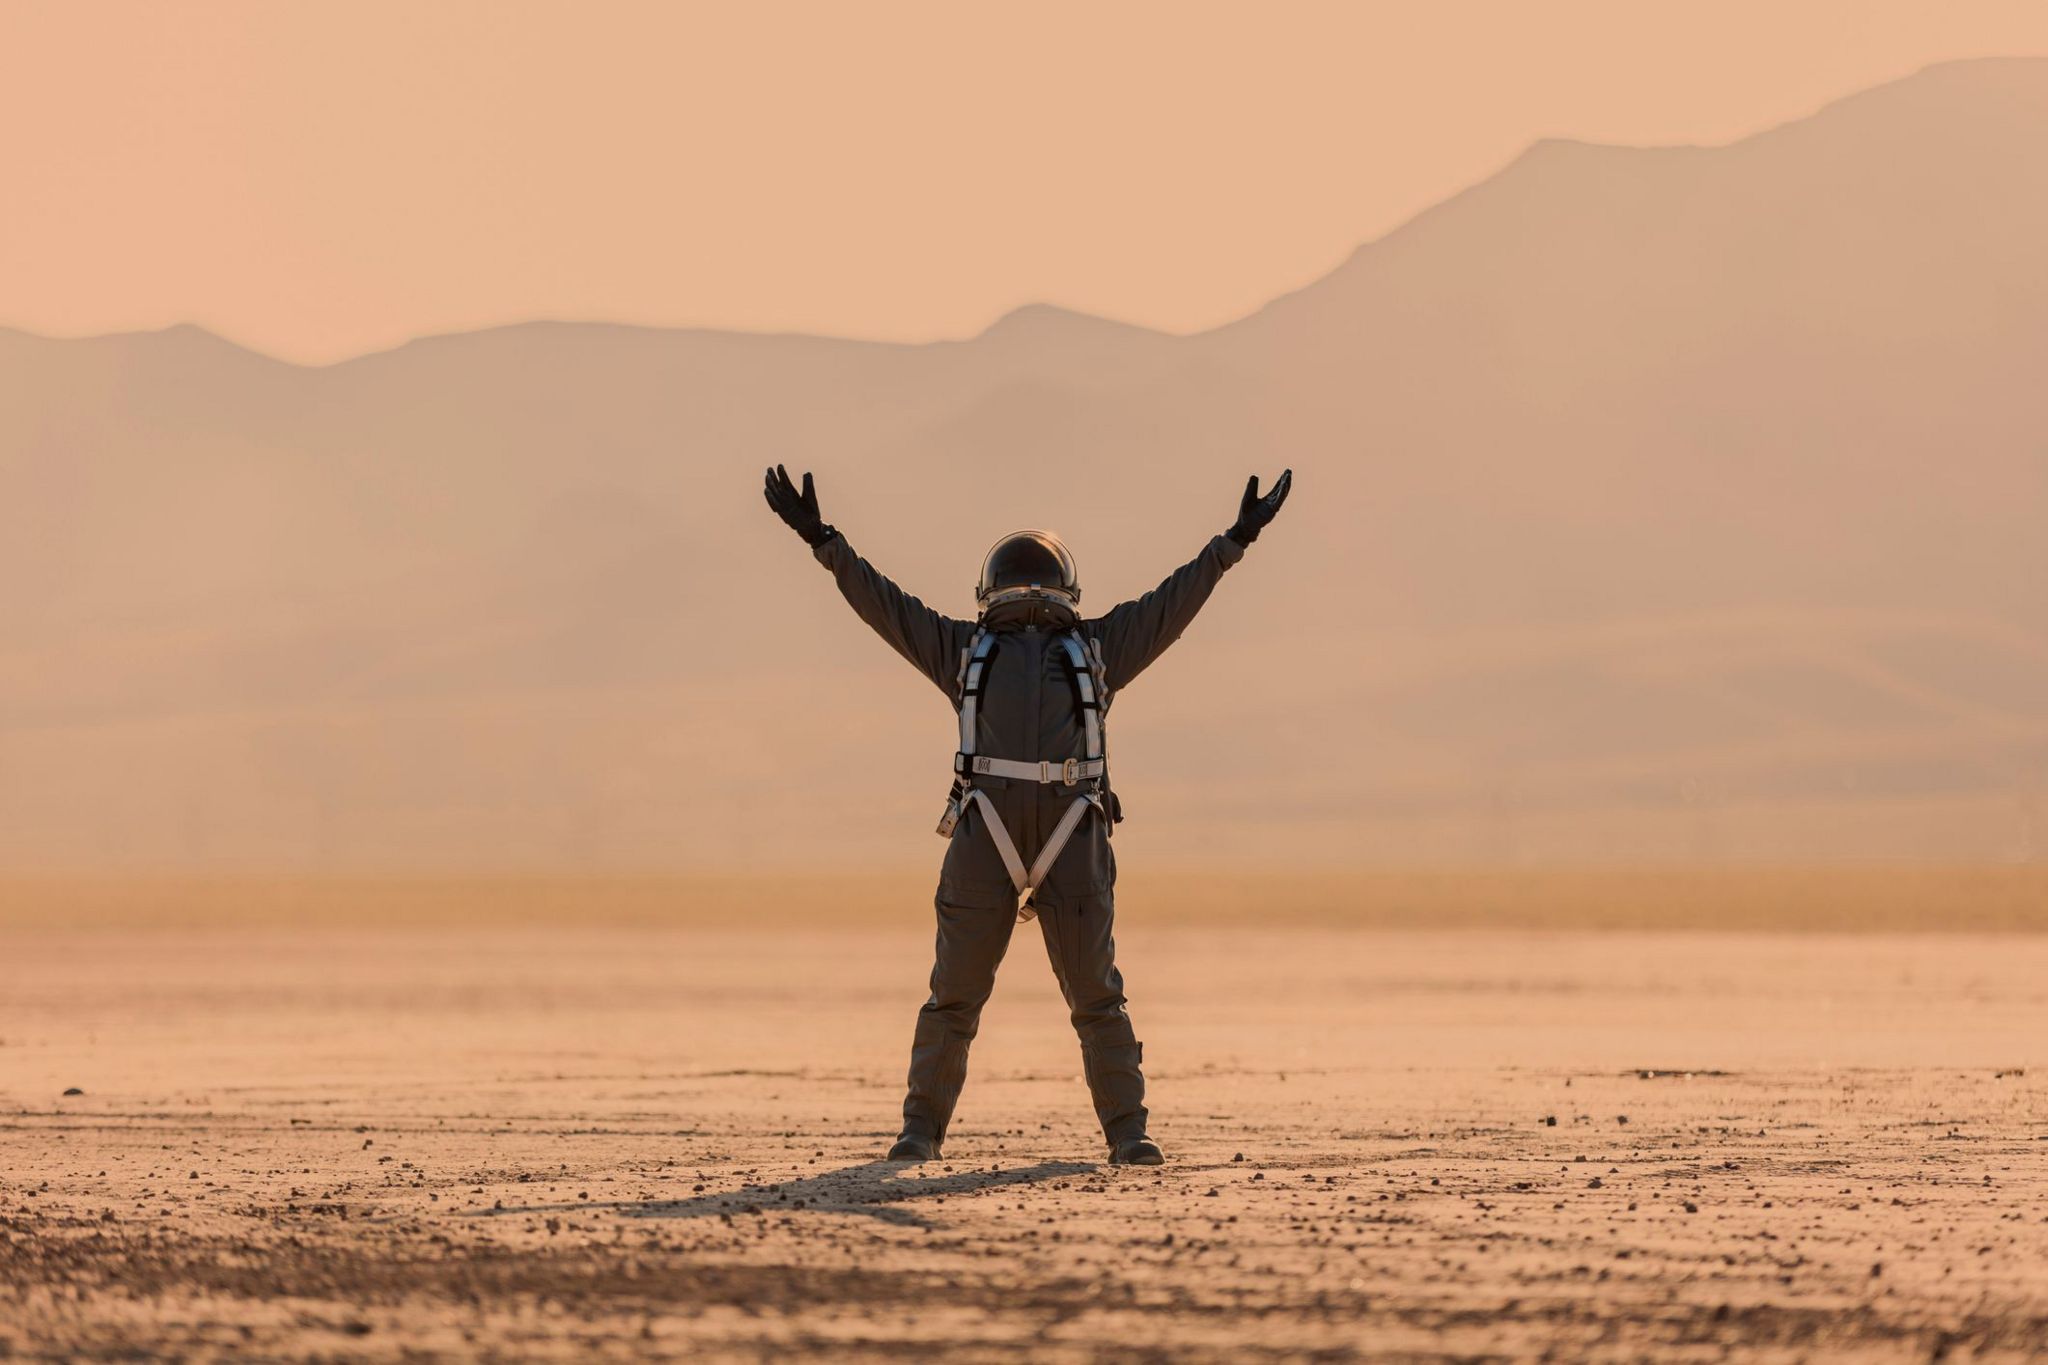  astronaut in space suit and helmet standing on Mars looking up with arms outstretched triumphantly with dust storm behind them, red orange all around.